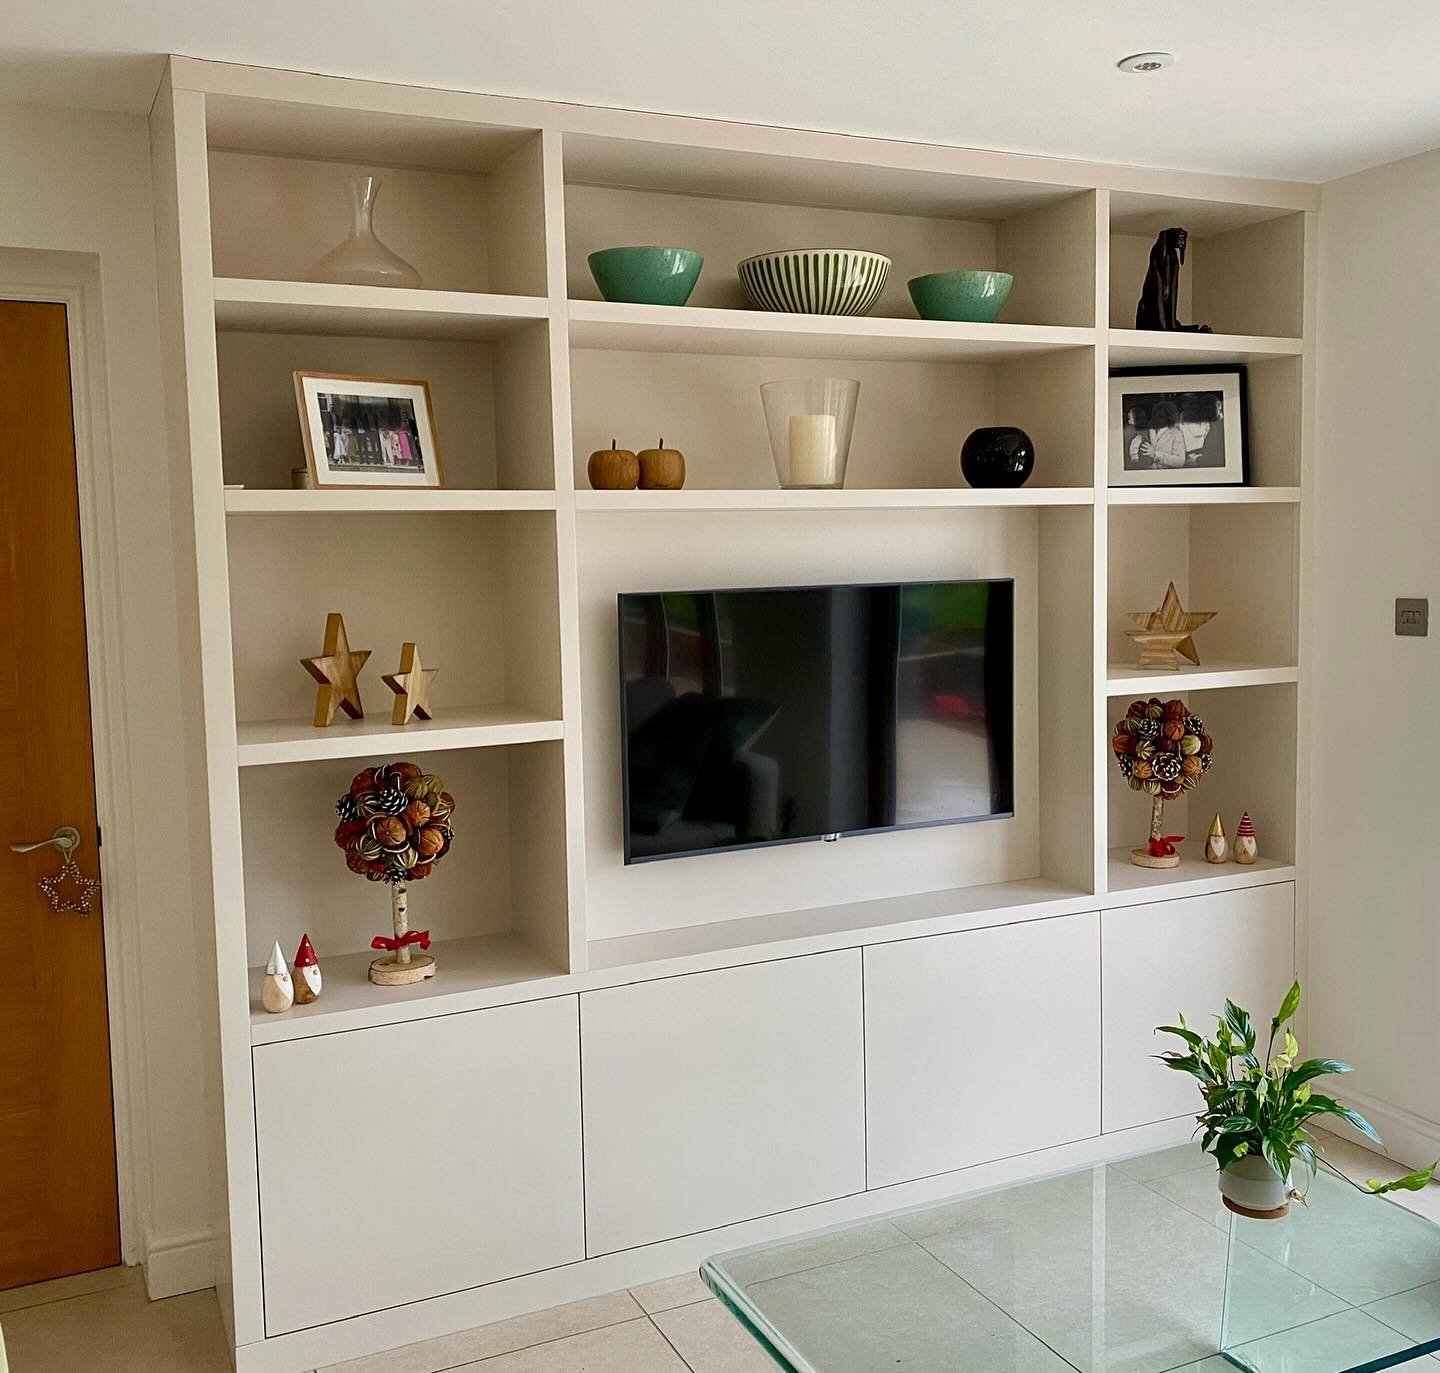 A recently installed TV cabinet. Light colours and soft LED lighting make this the perfect addition to this living space. 
.
.
.
#mediacabinet #tvcabinet #bespokemediaunit #bespokecabinetry #furnituremaker #furnituredesign #livingroomdecor #homedecor